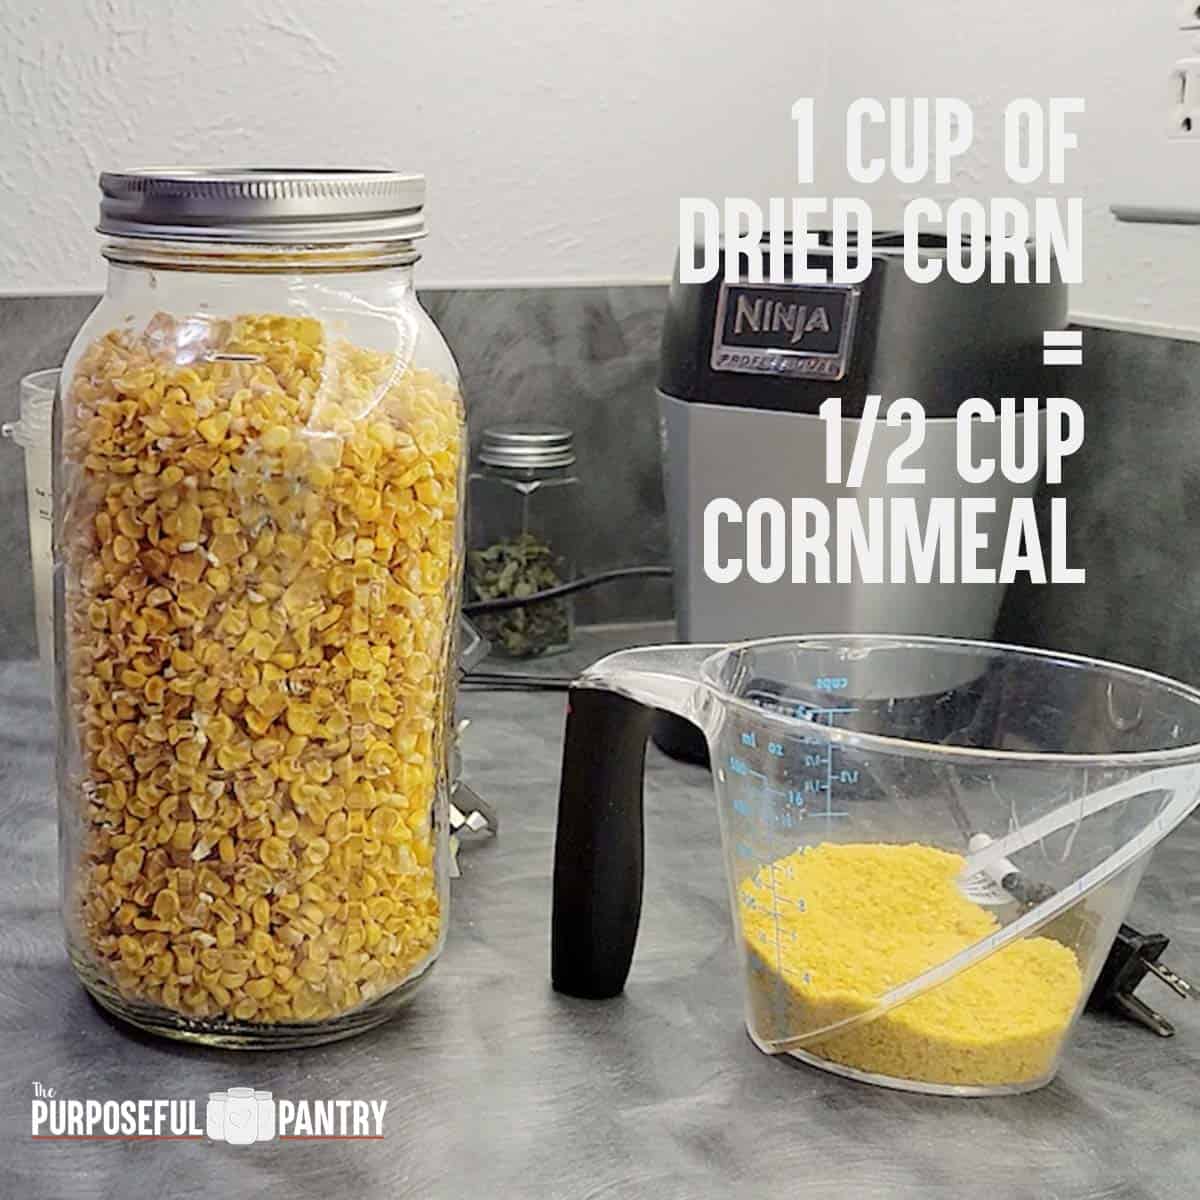 Jar of dried corn and measuring cup of corn meal made from that dehydrated corn